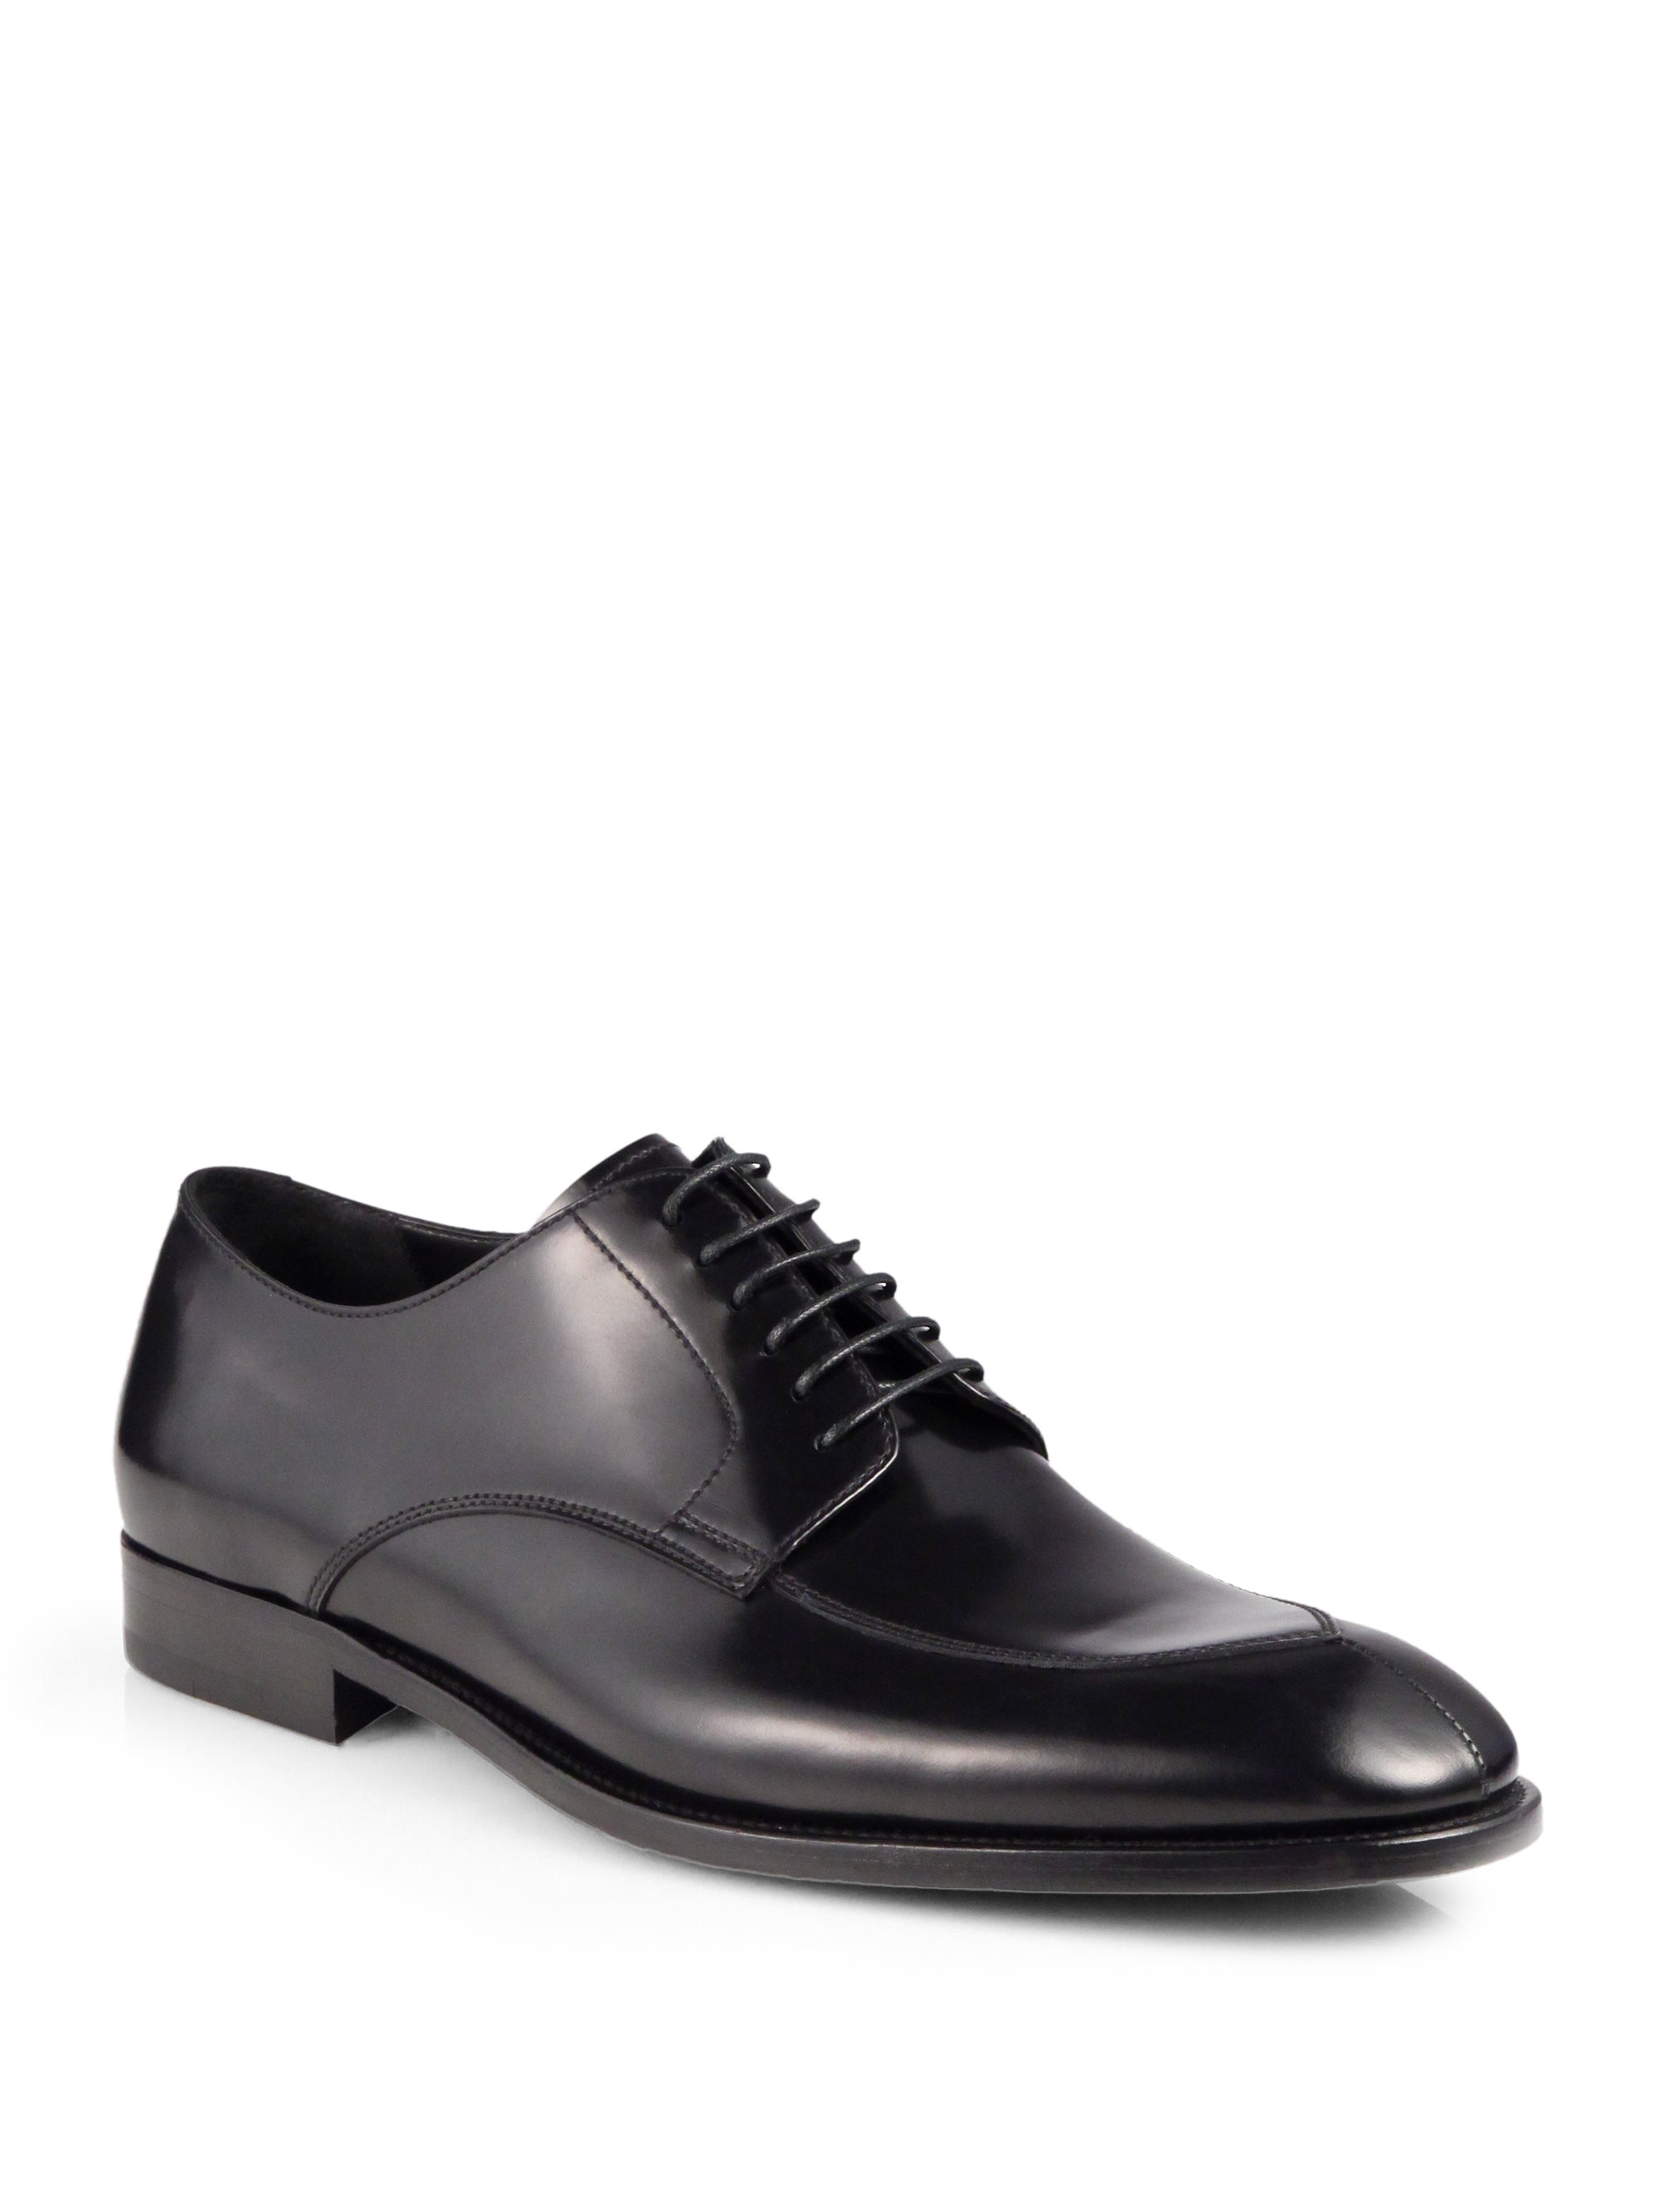 Giorgio Armani Leather Laceup Dress Shoes in Gray for Men (SOLID BLACK ...